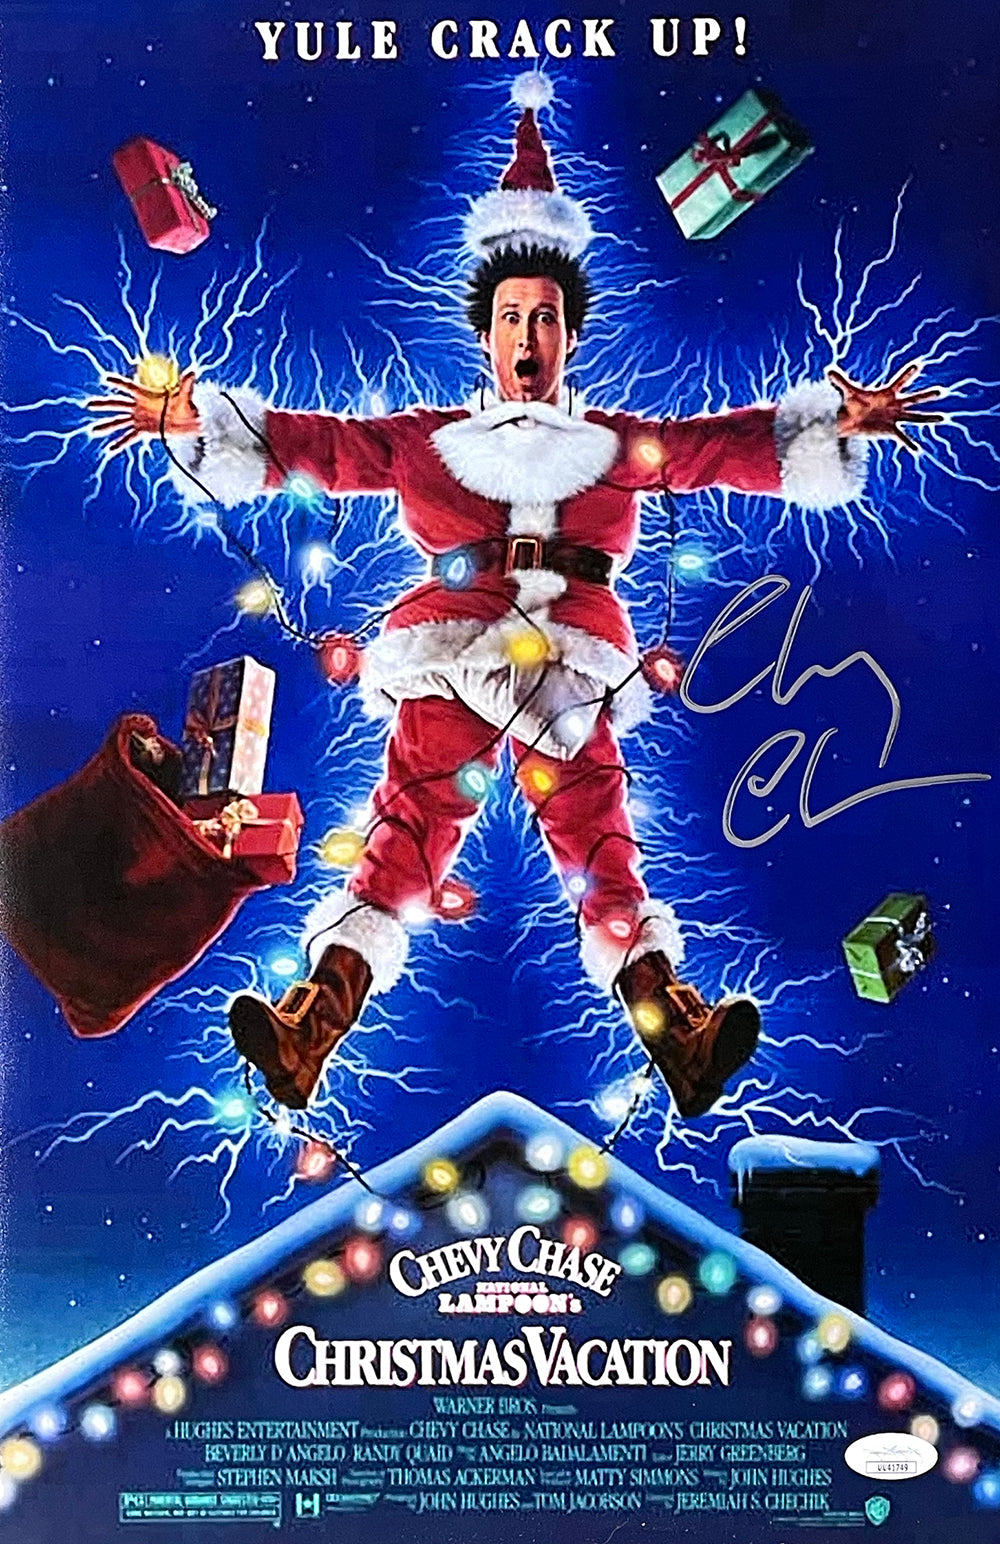 Chevy Chase Signed Chicago Blackhawks Griswold Jersey National Lampoon  Xmas- BAS